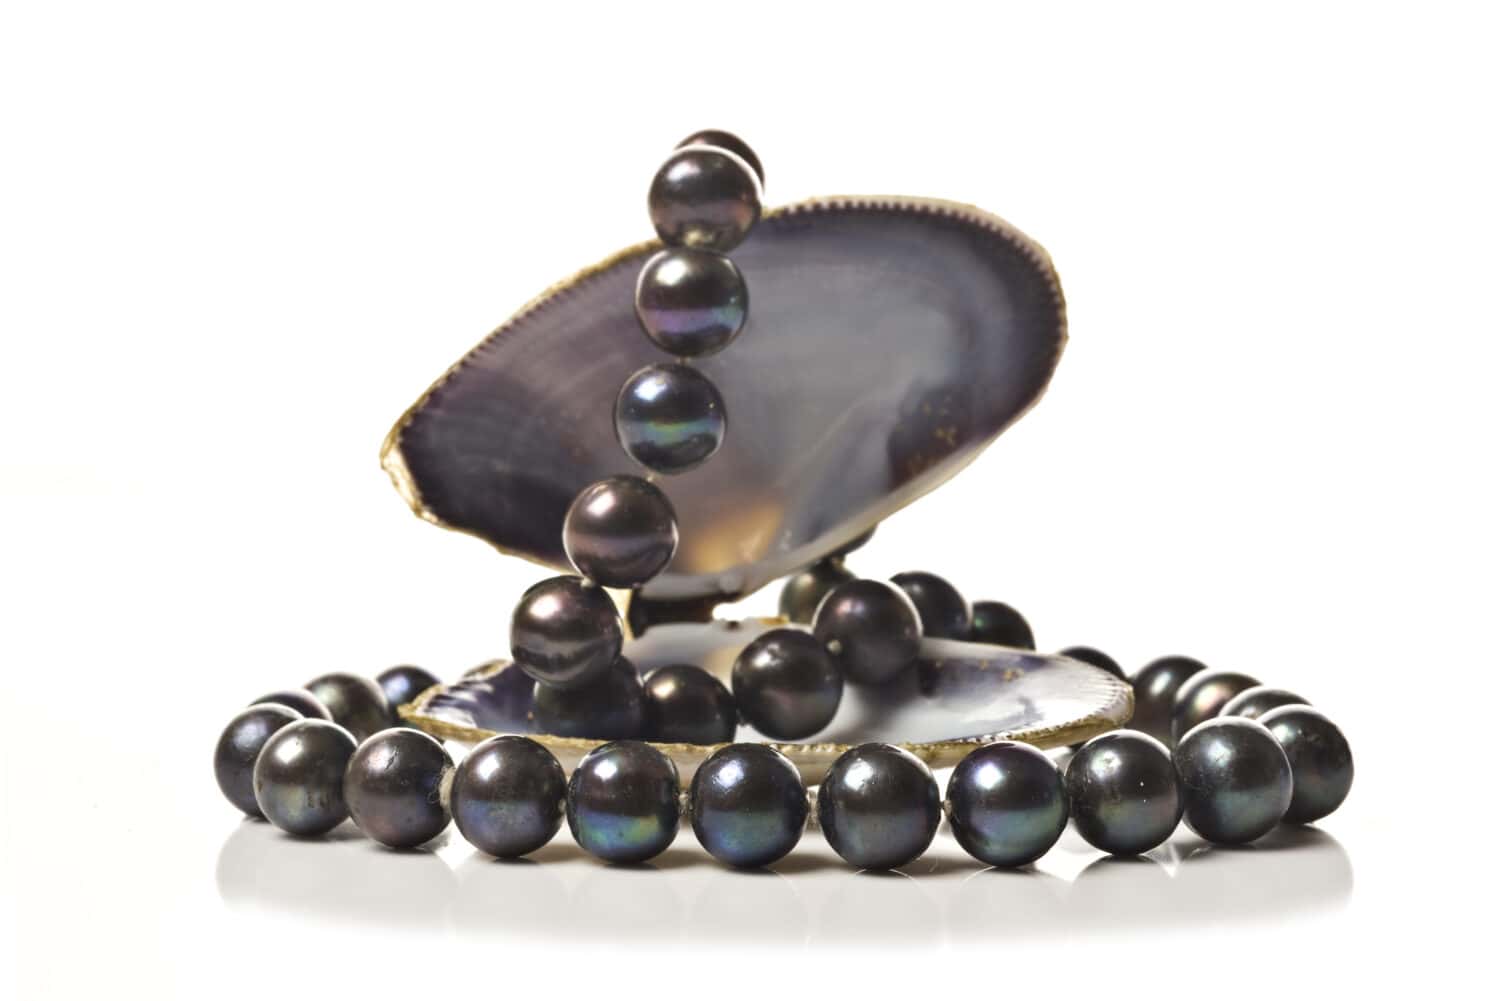 String of black pearls in a sea shell on white